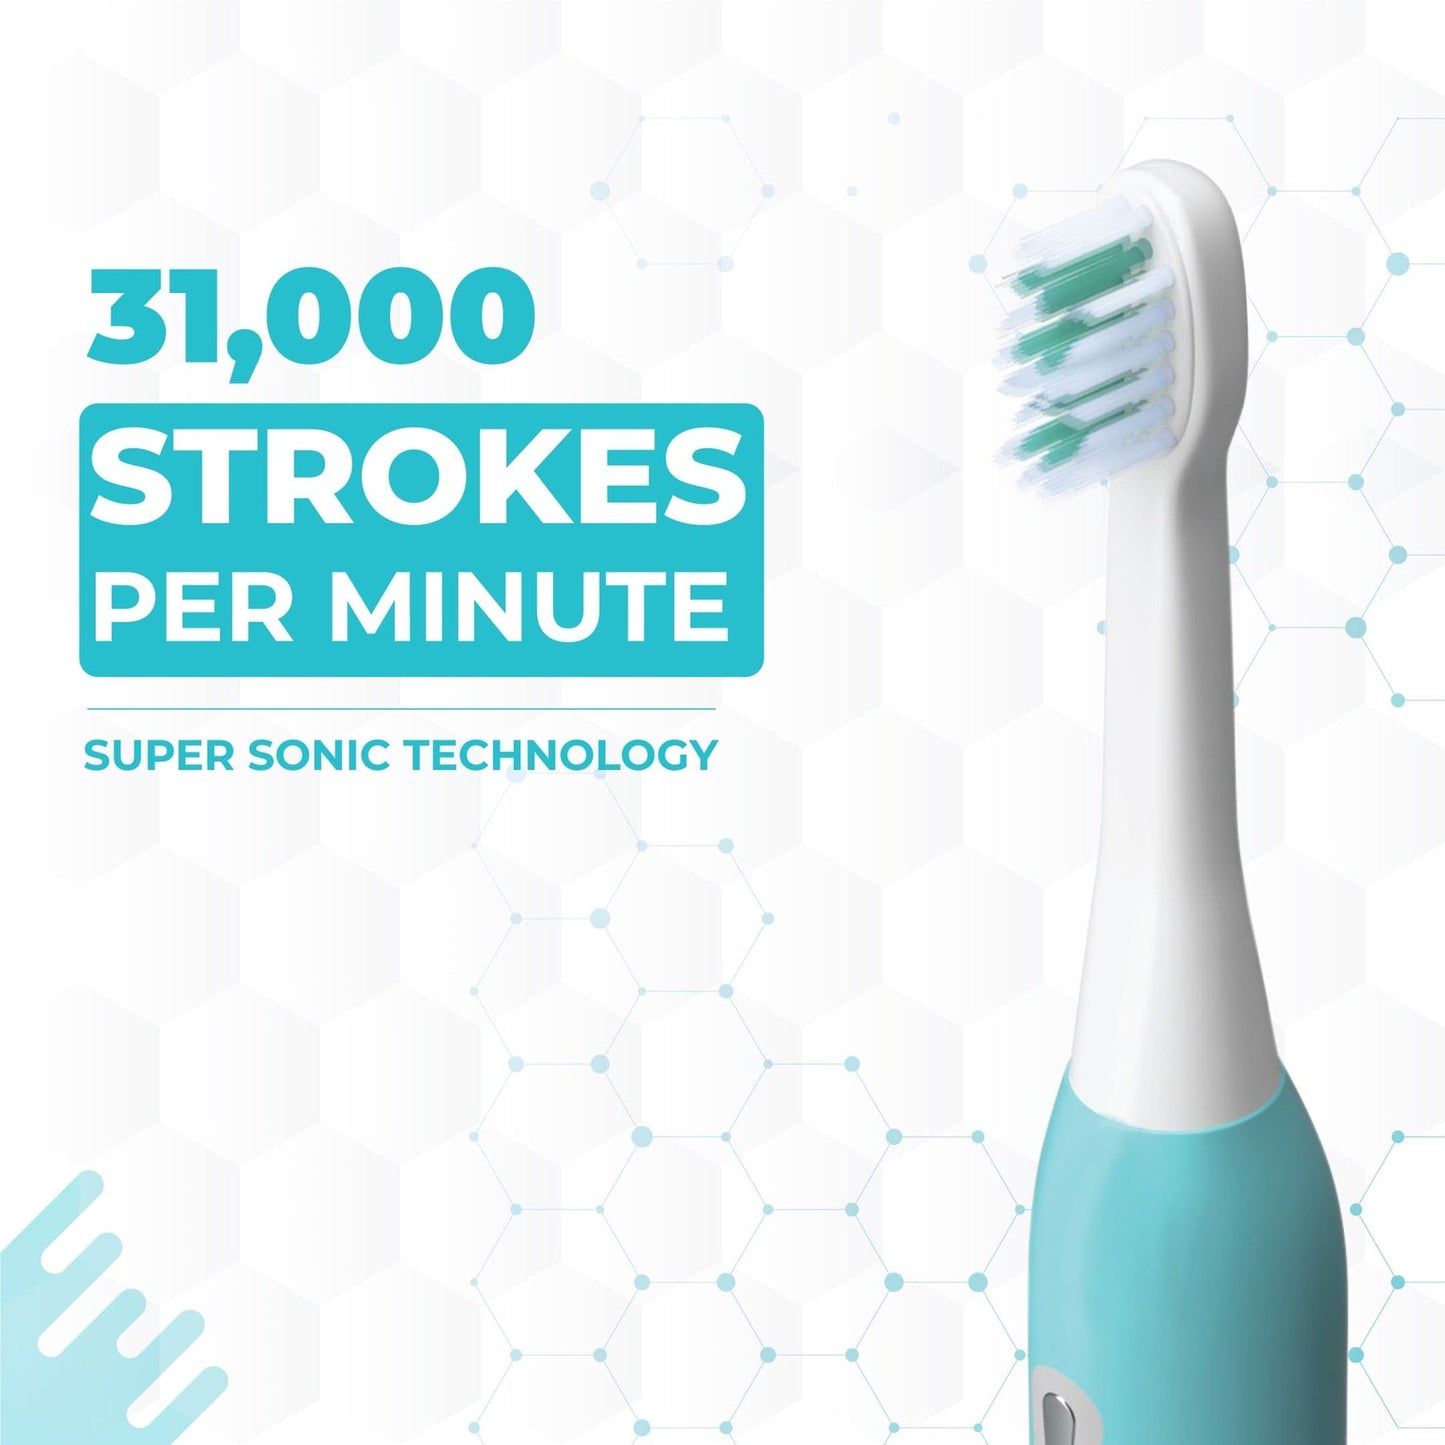 Ultra Flow - Electric Toothbrush with 2 Extra Brush Heads